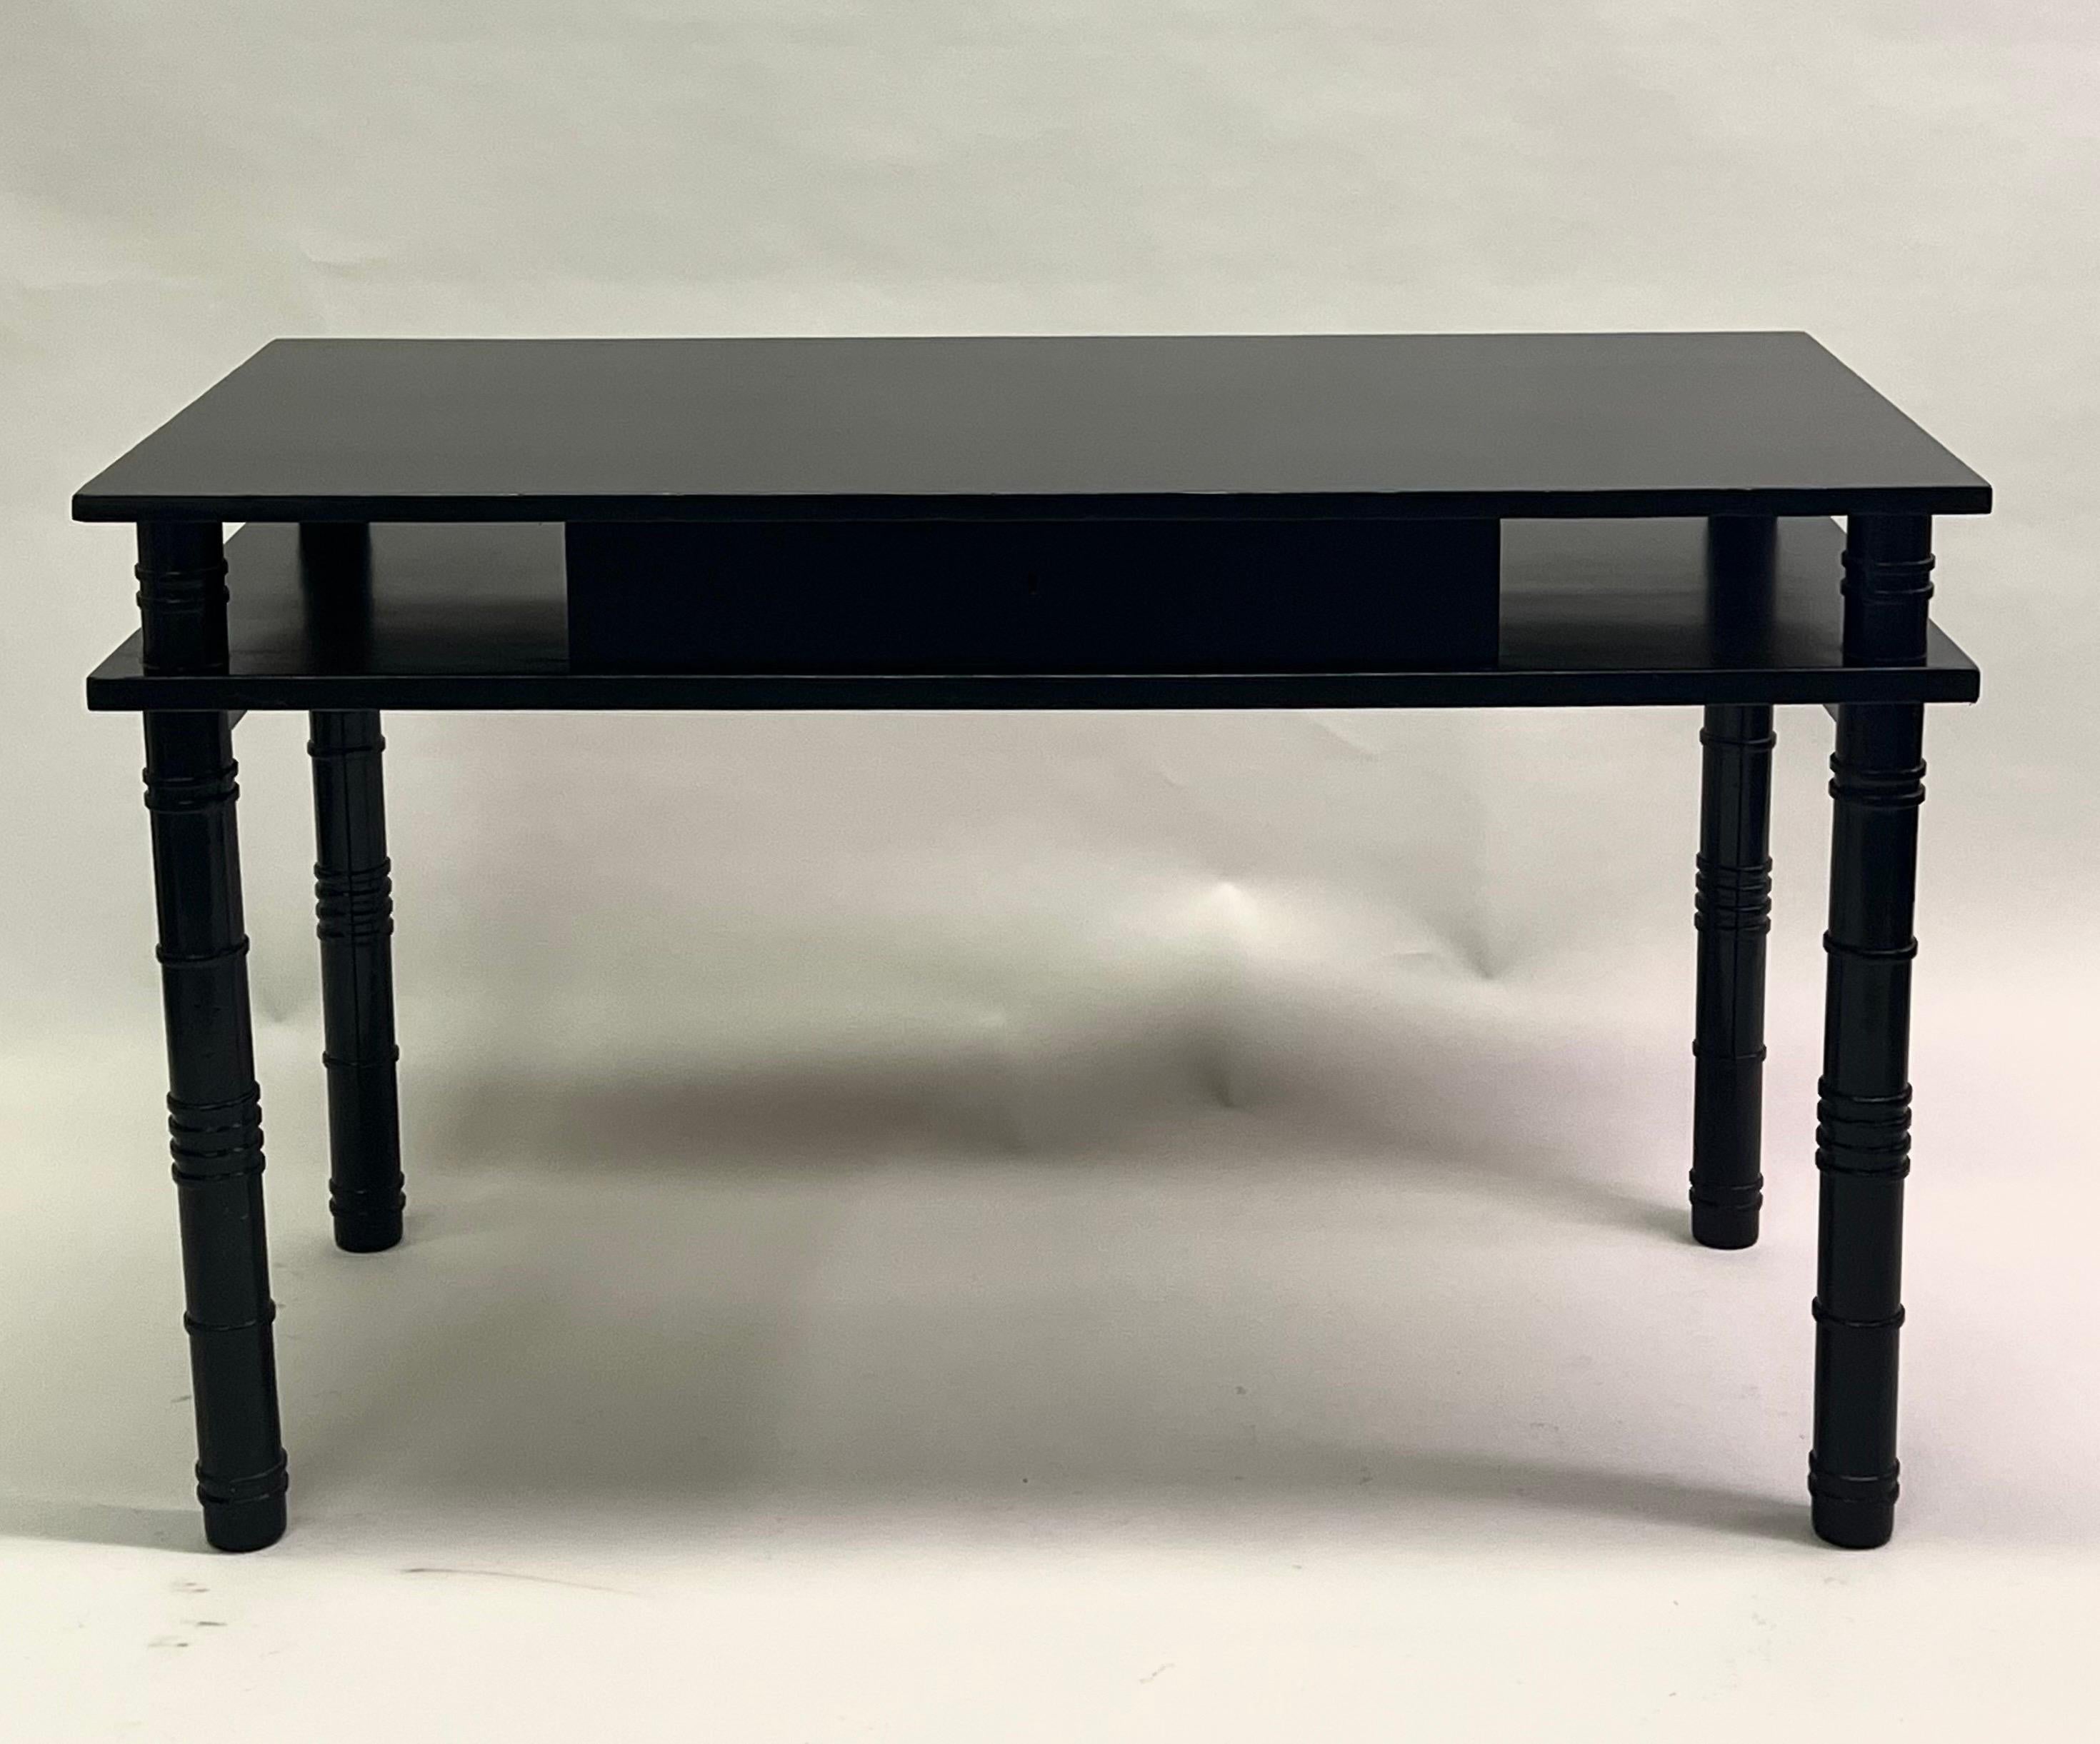 Art Deco French MidCentury Modern Neoclassical Ebonized Sycamore Desk by Leon Jallot 1936 For Sale